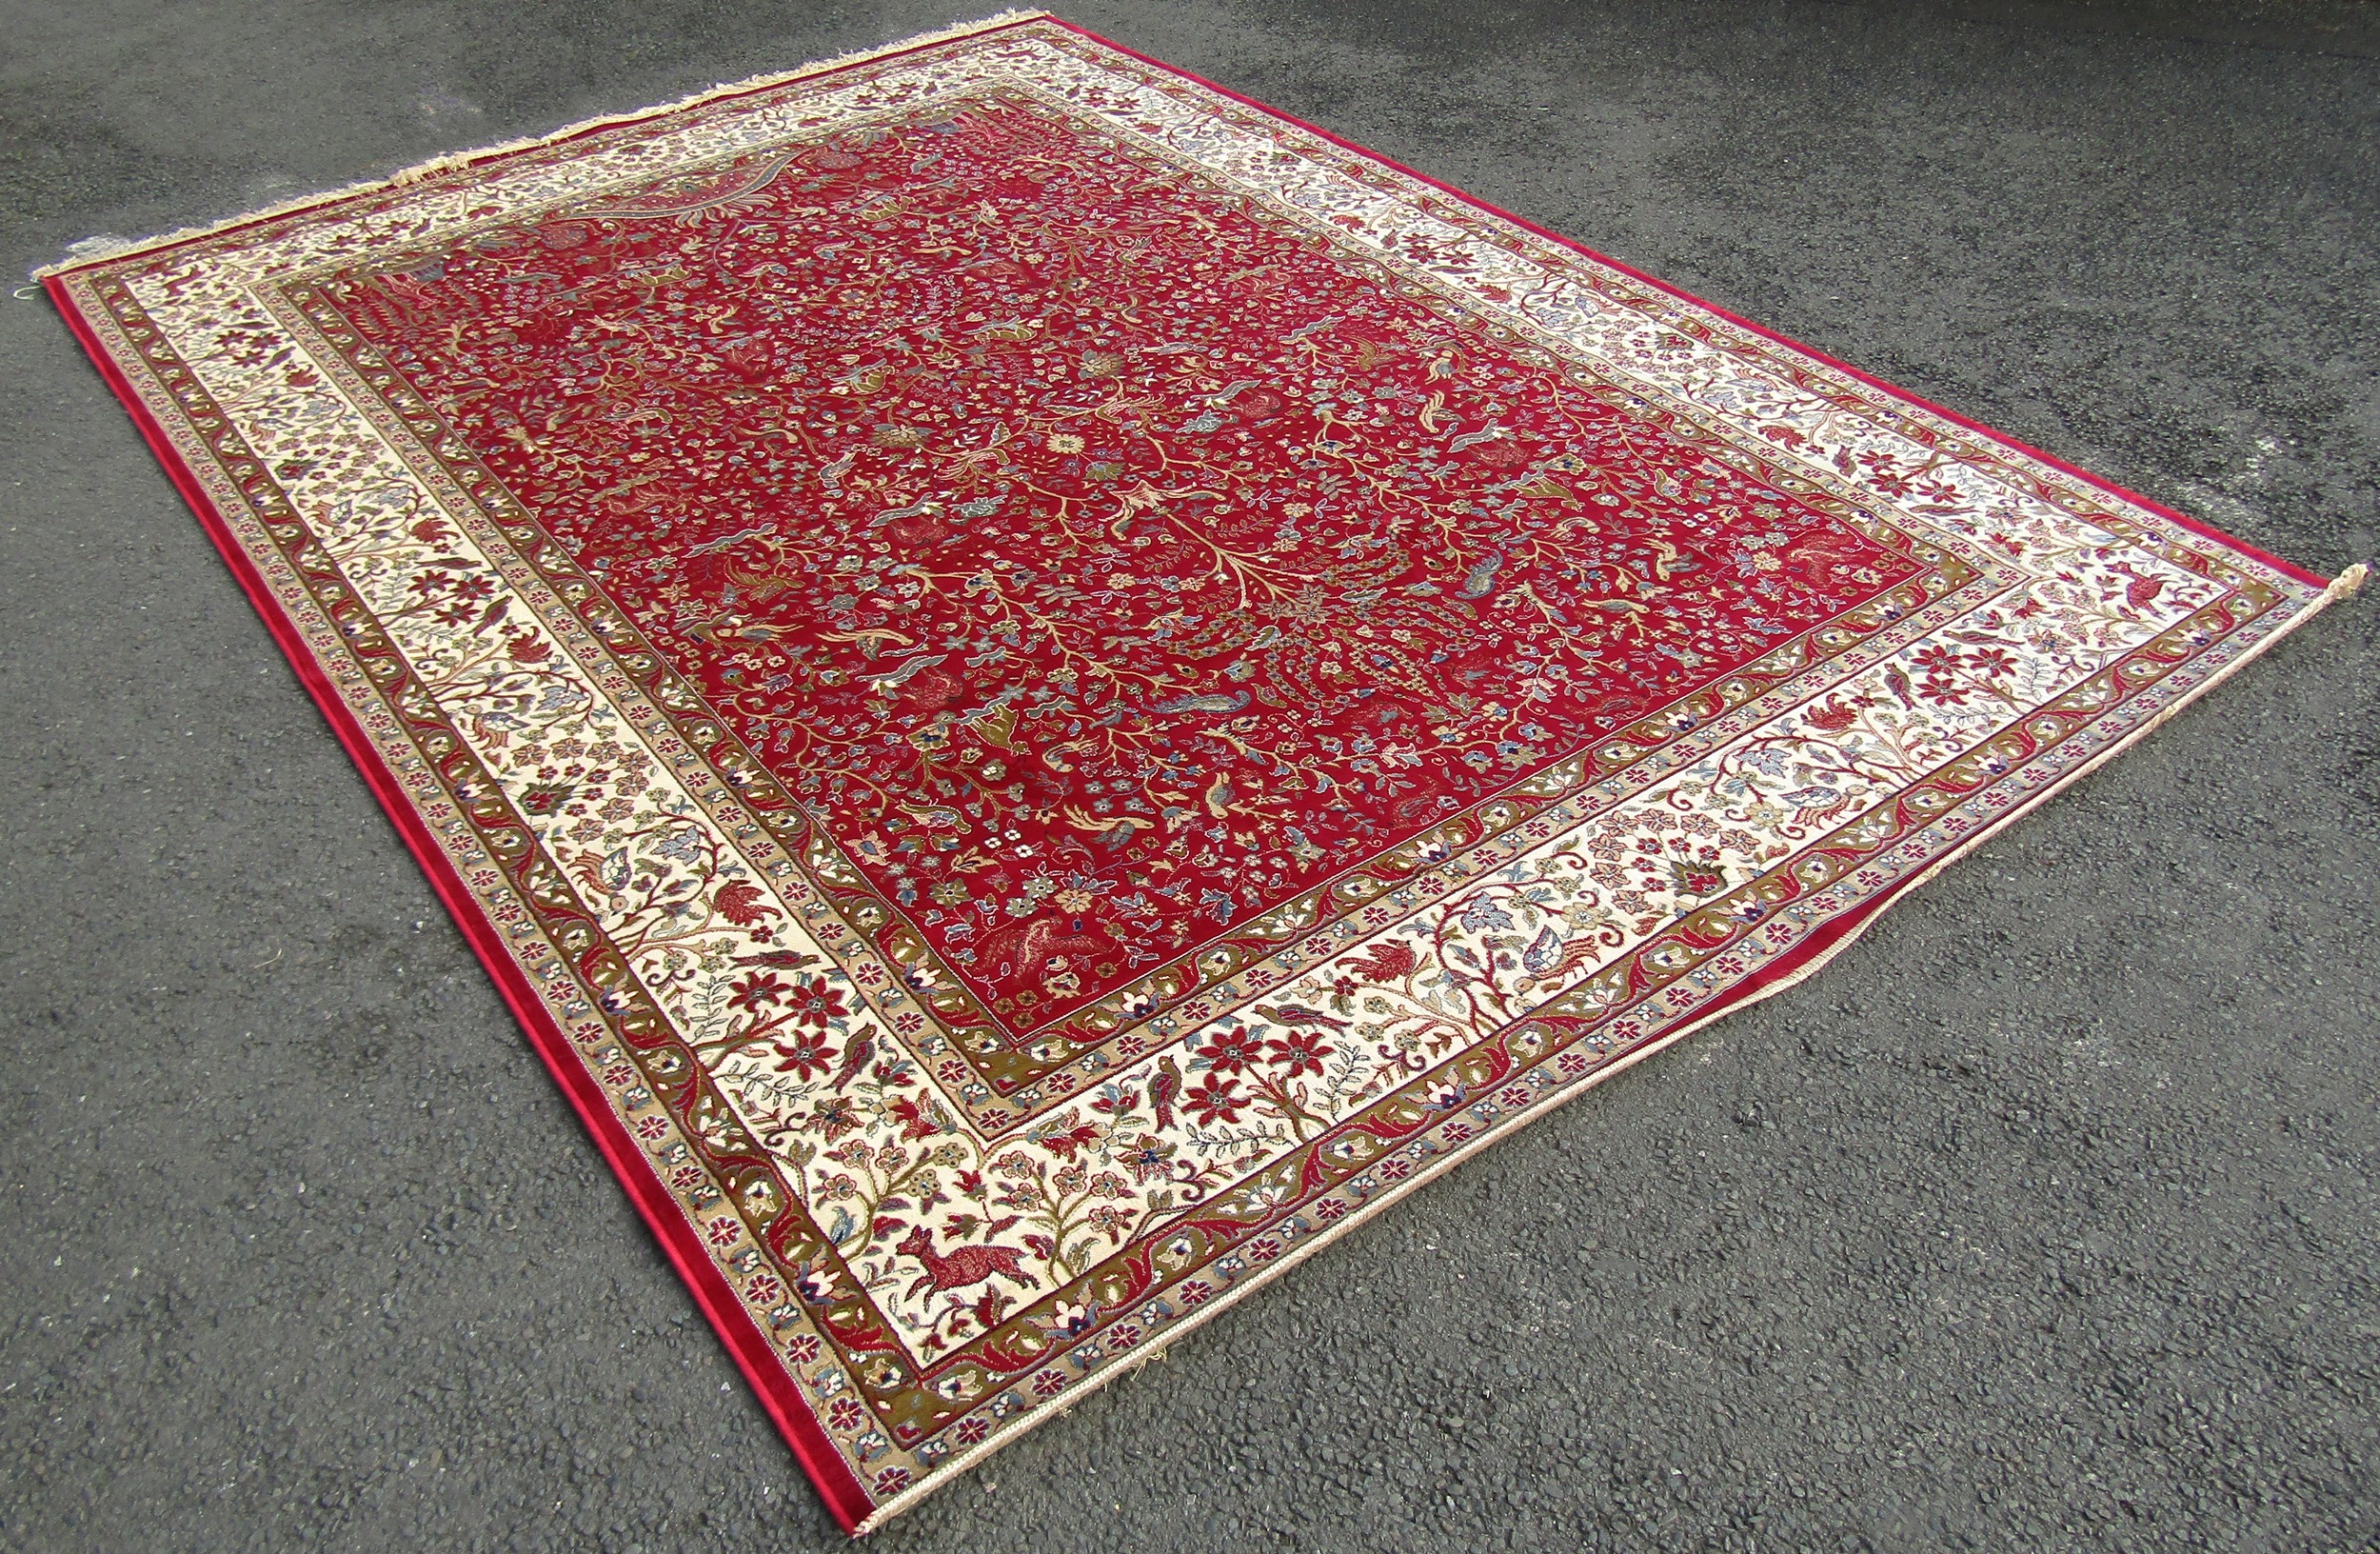 A Kashmir carpet with tree of life pattern, 330cm x 240cm - Image 2 of 3